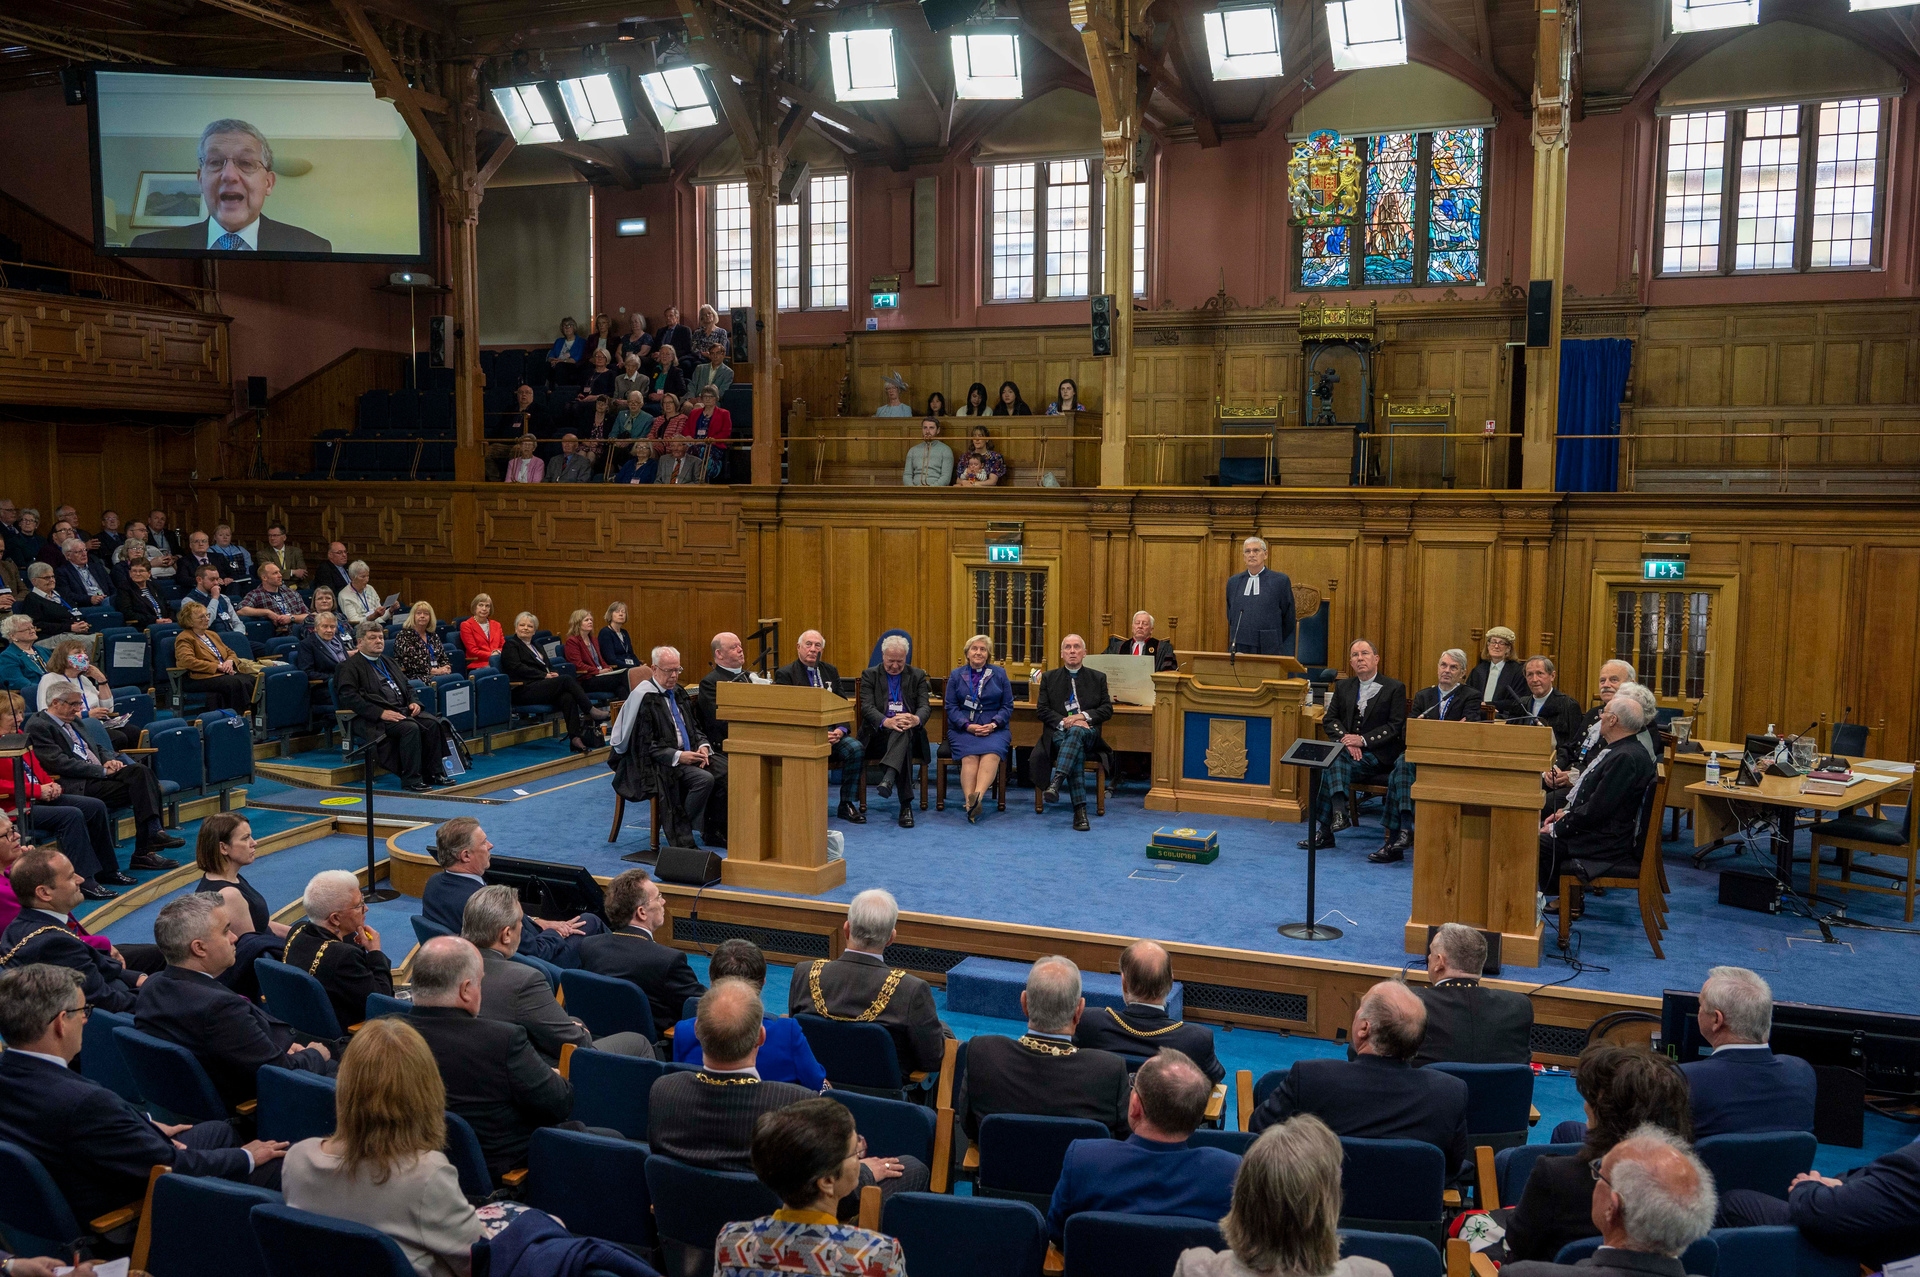 Moderator Rev Iain Greenshields is installed in a ceremony at the beginning of The General Assembly of the Church of Scotland by his predecessor Jim Wallace, Baron Wallace of Tankerness.